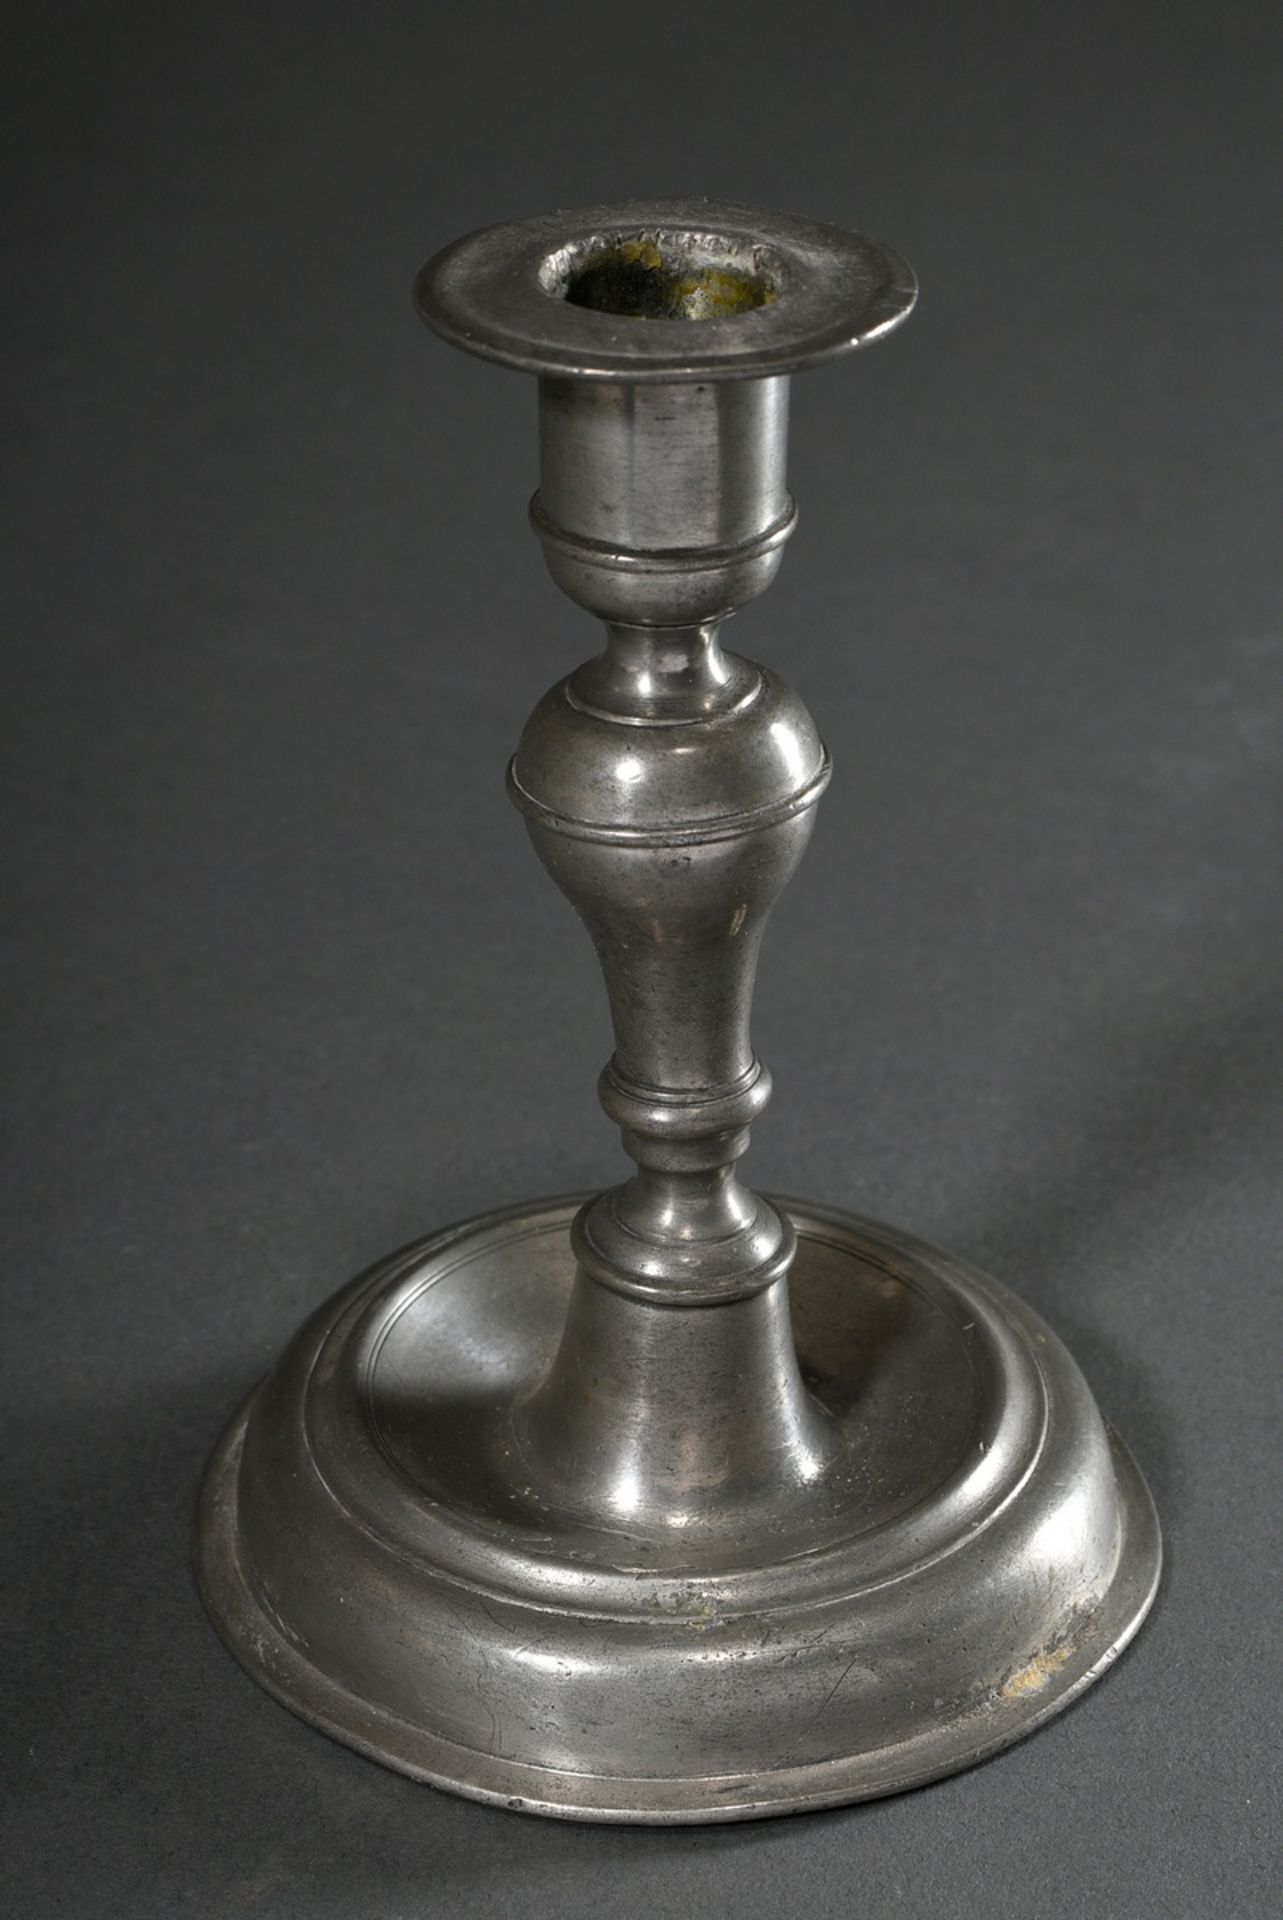 3 Various pieces of pewter, 18th century: large plate with engraved owner's monogram "C.S.S. 1775", - Image 5 of 11